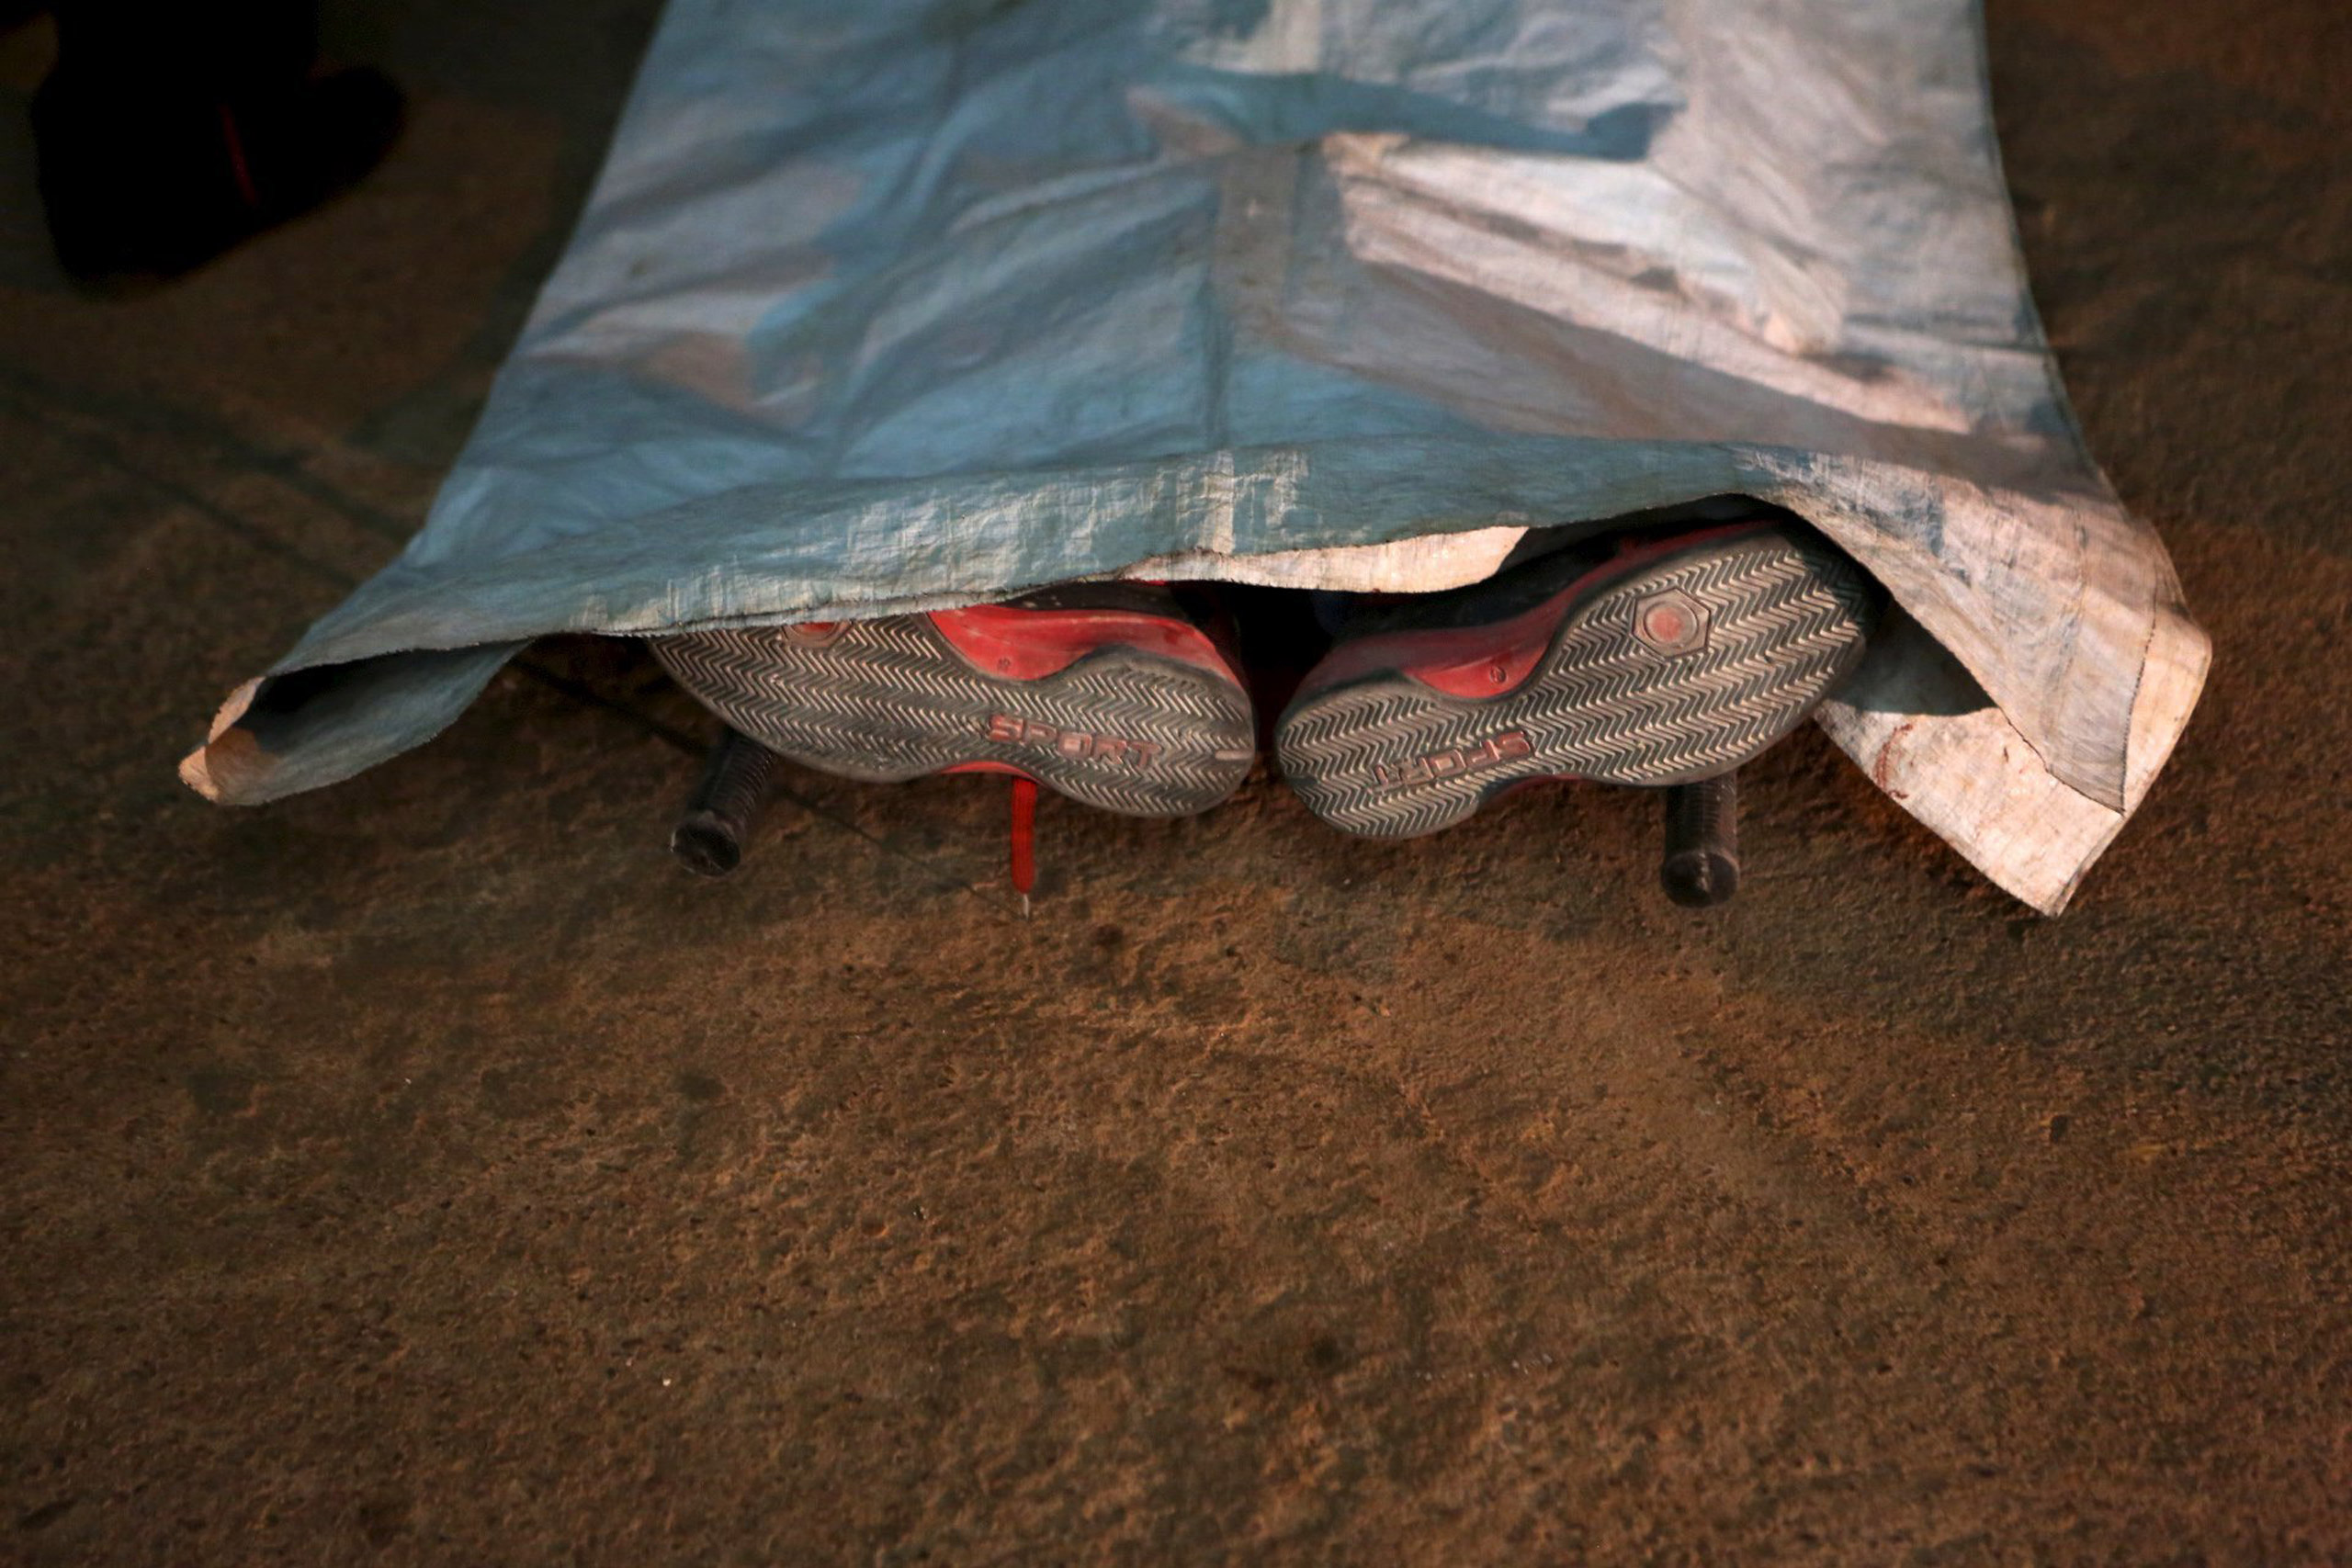 A corpse is seen outside the Radisson hotel in Bamako, Mali, on Nov. 20, 2015.